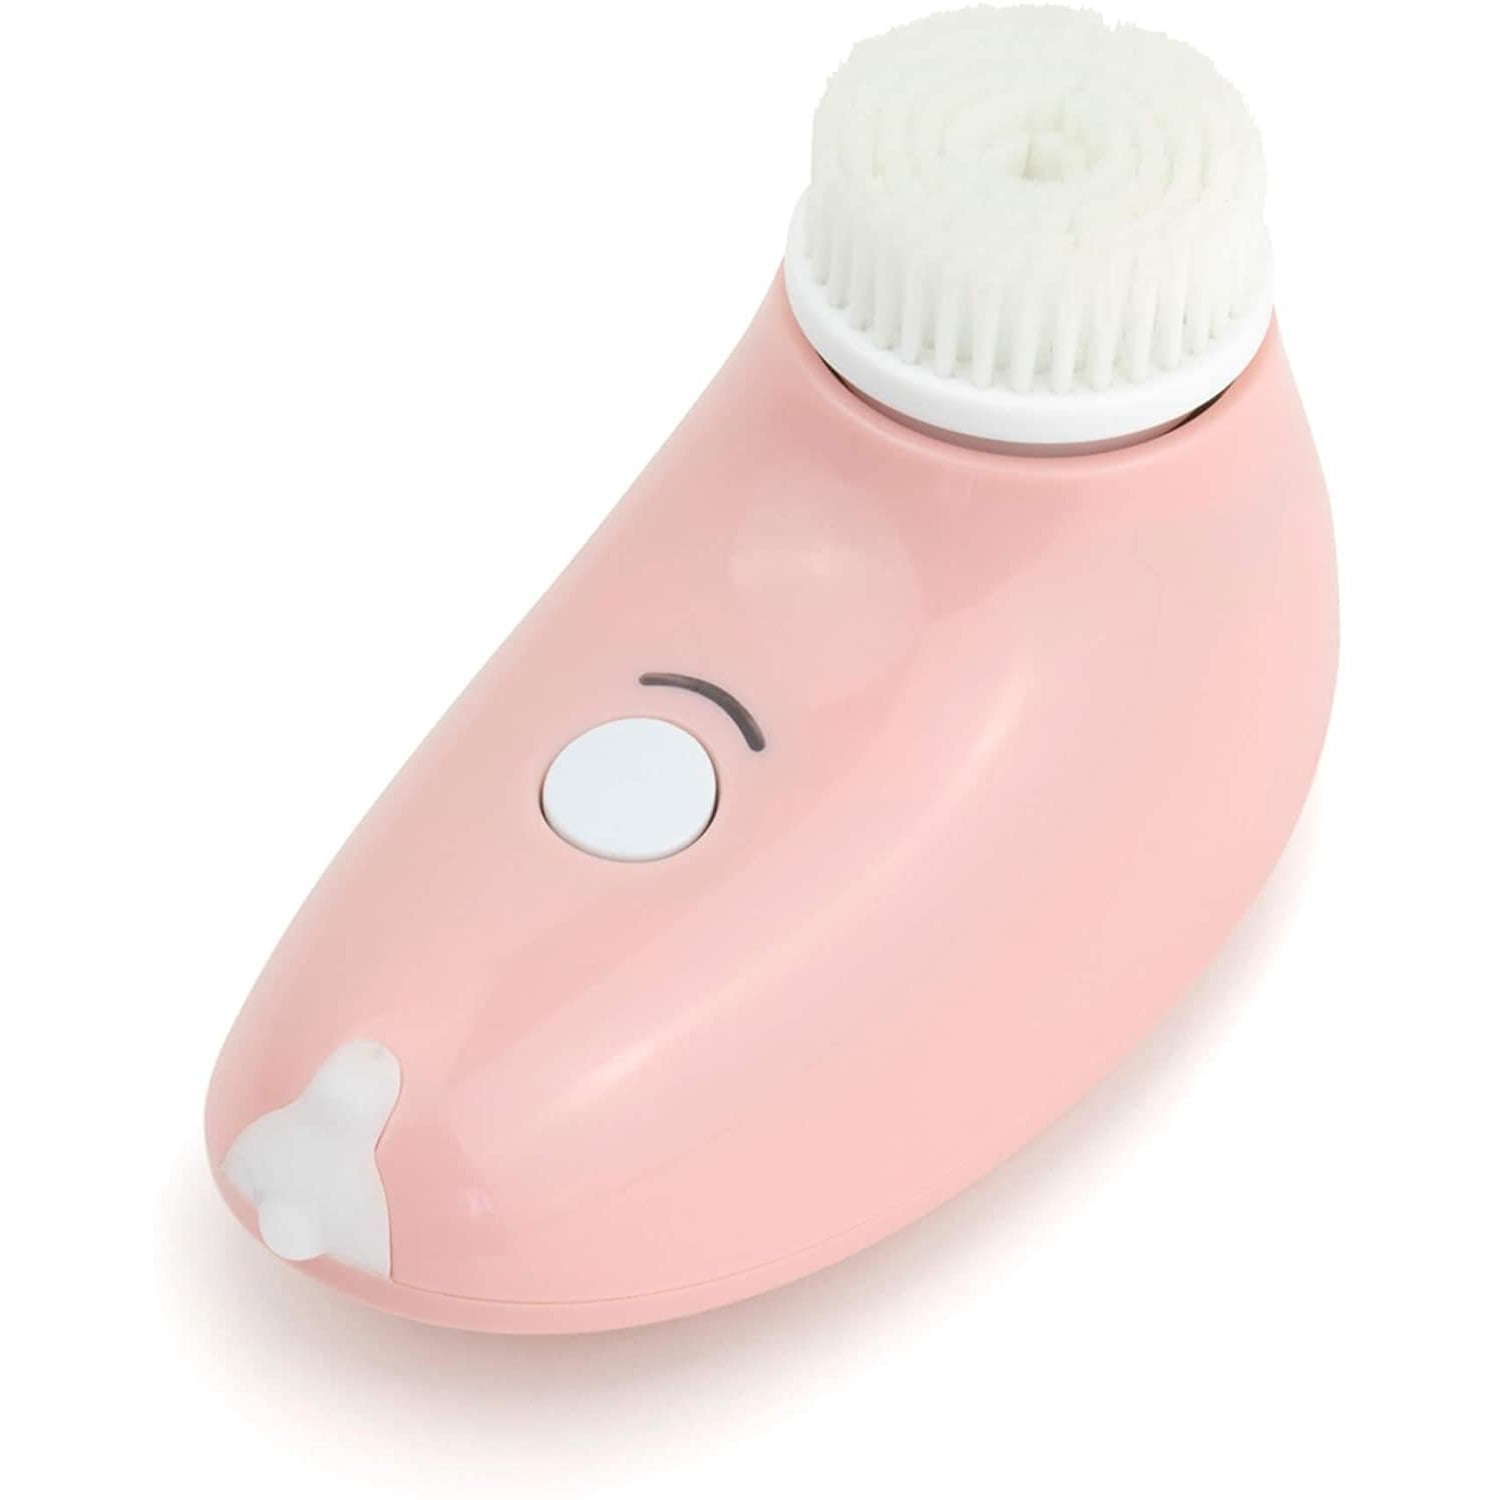 Magnitone First Step Skin-Balancing Daily Cleansing Brush